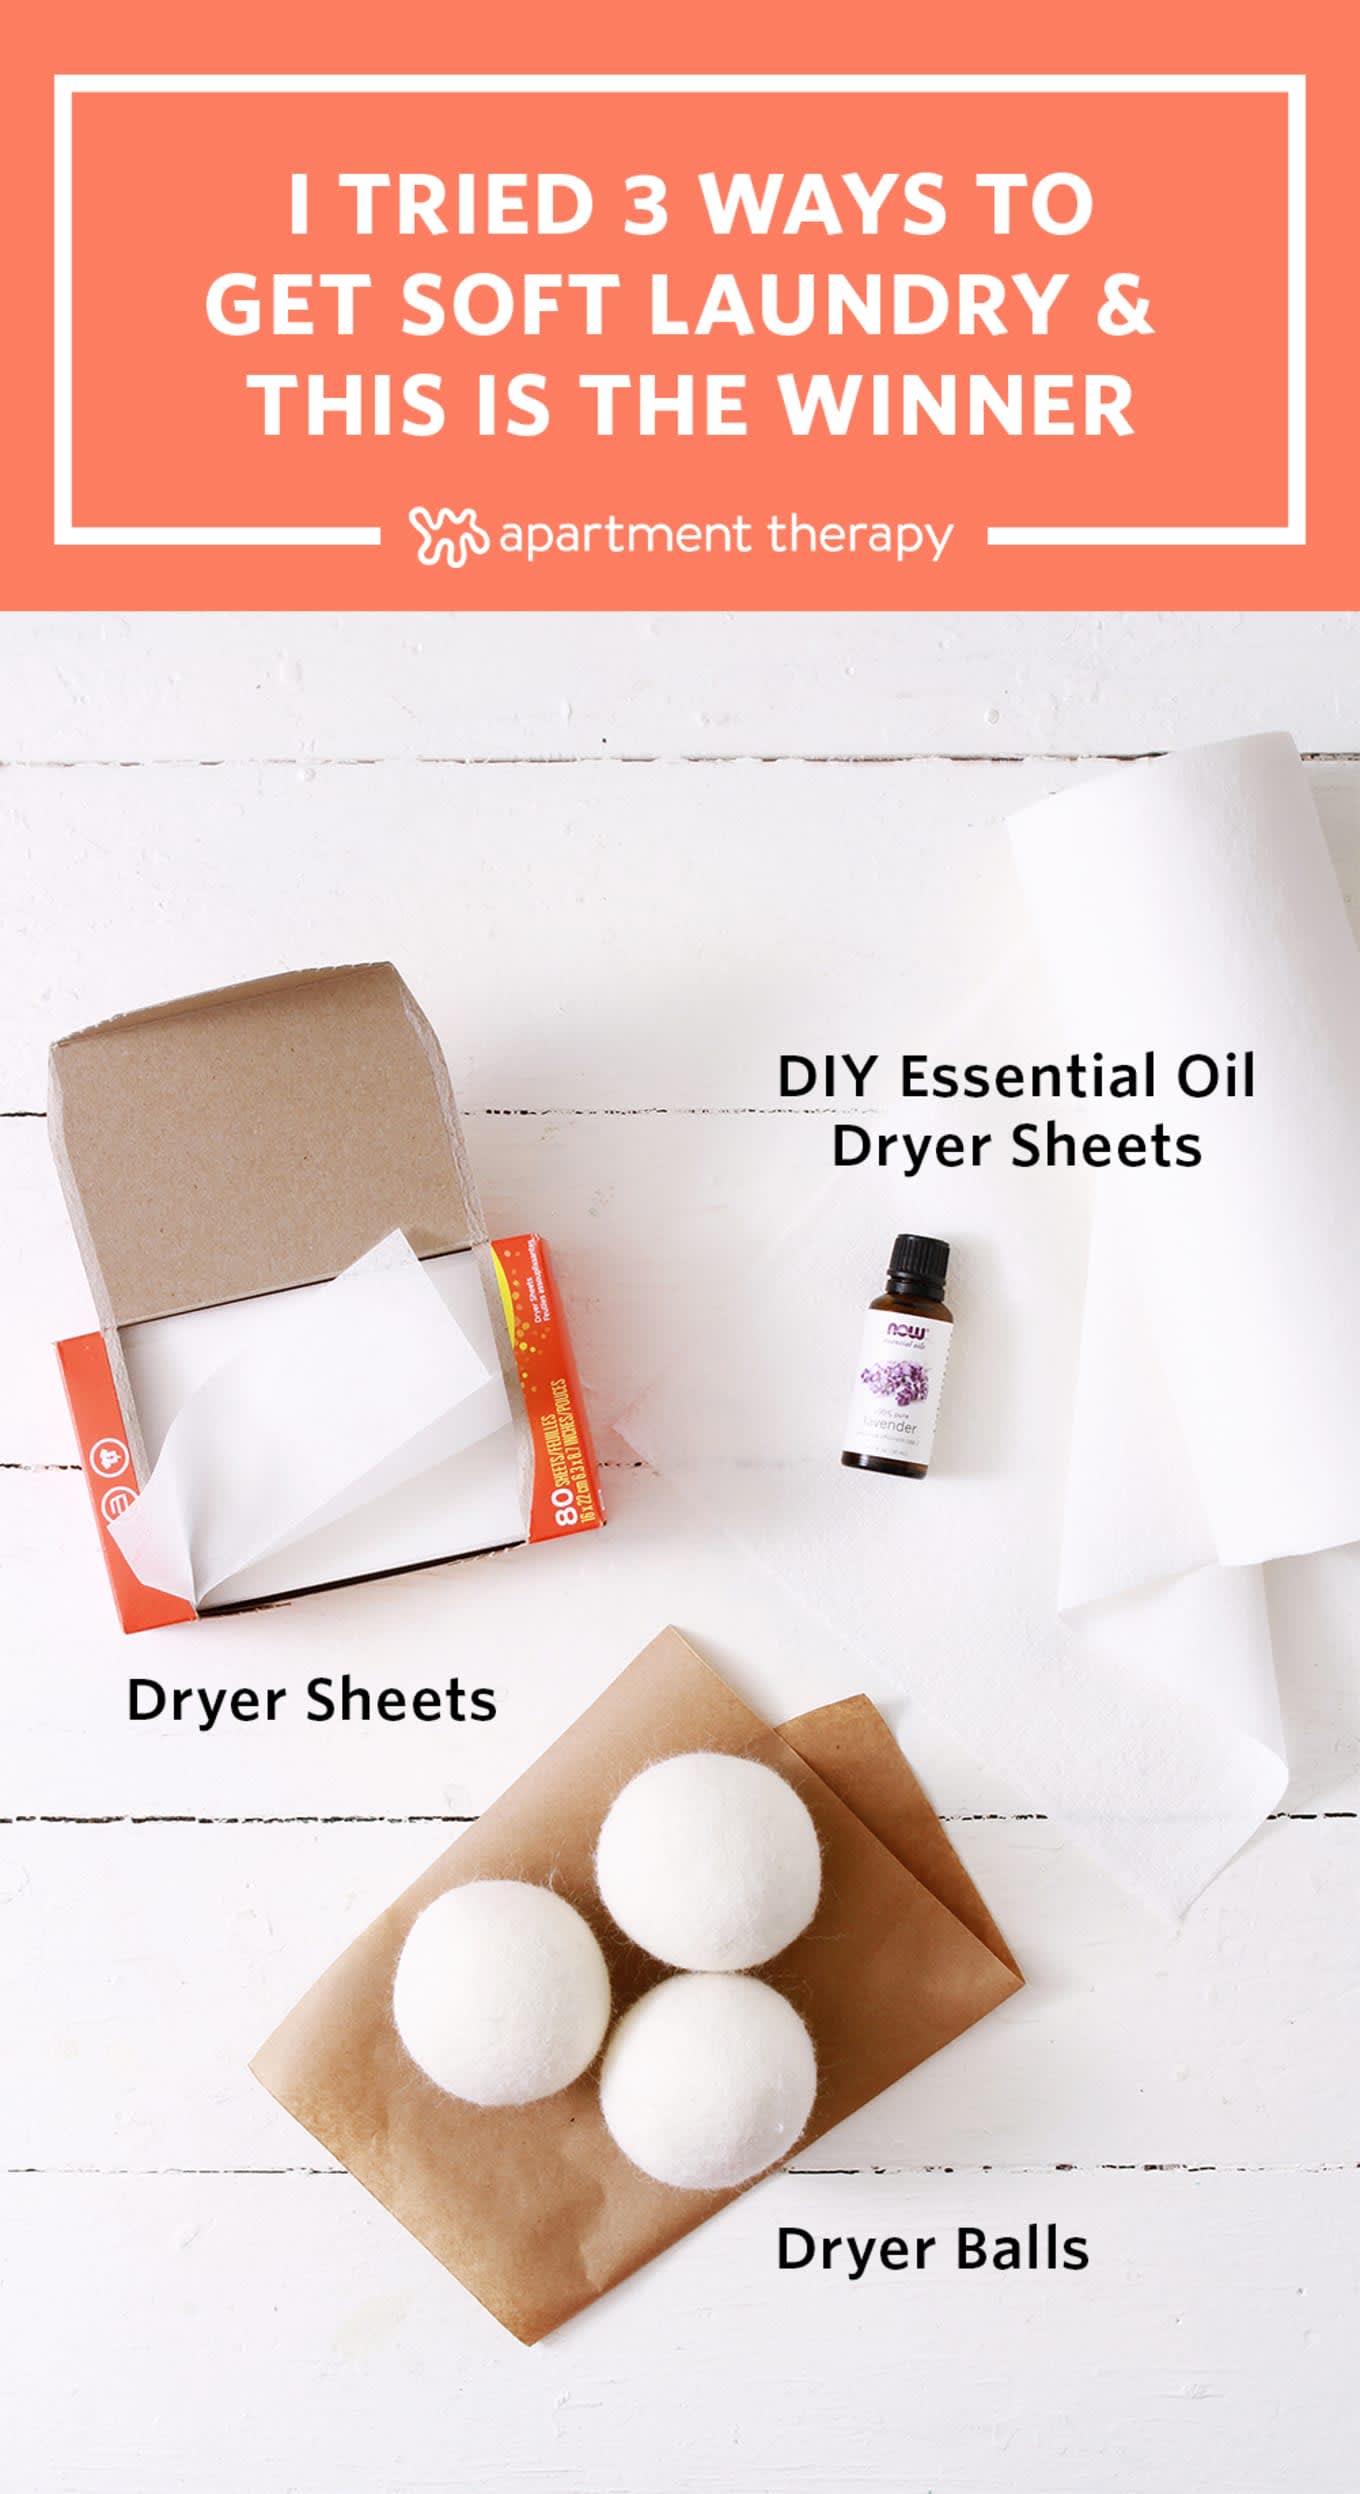 Dryer Balls vs. Dryer Sheets: Is One Better Than the Other? - KDC